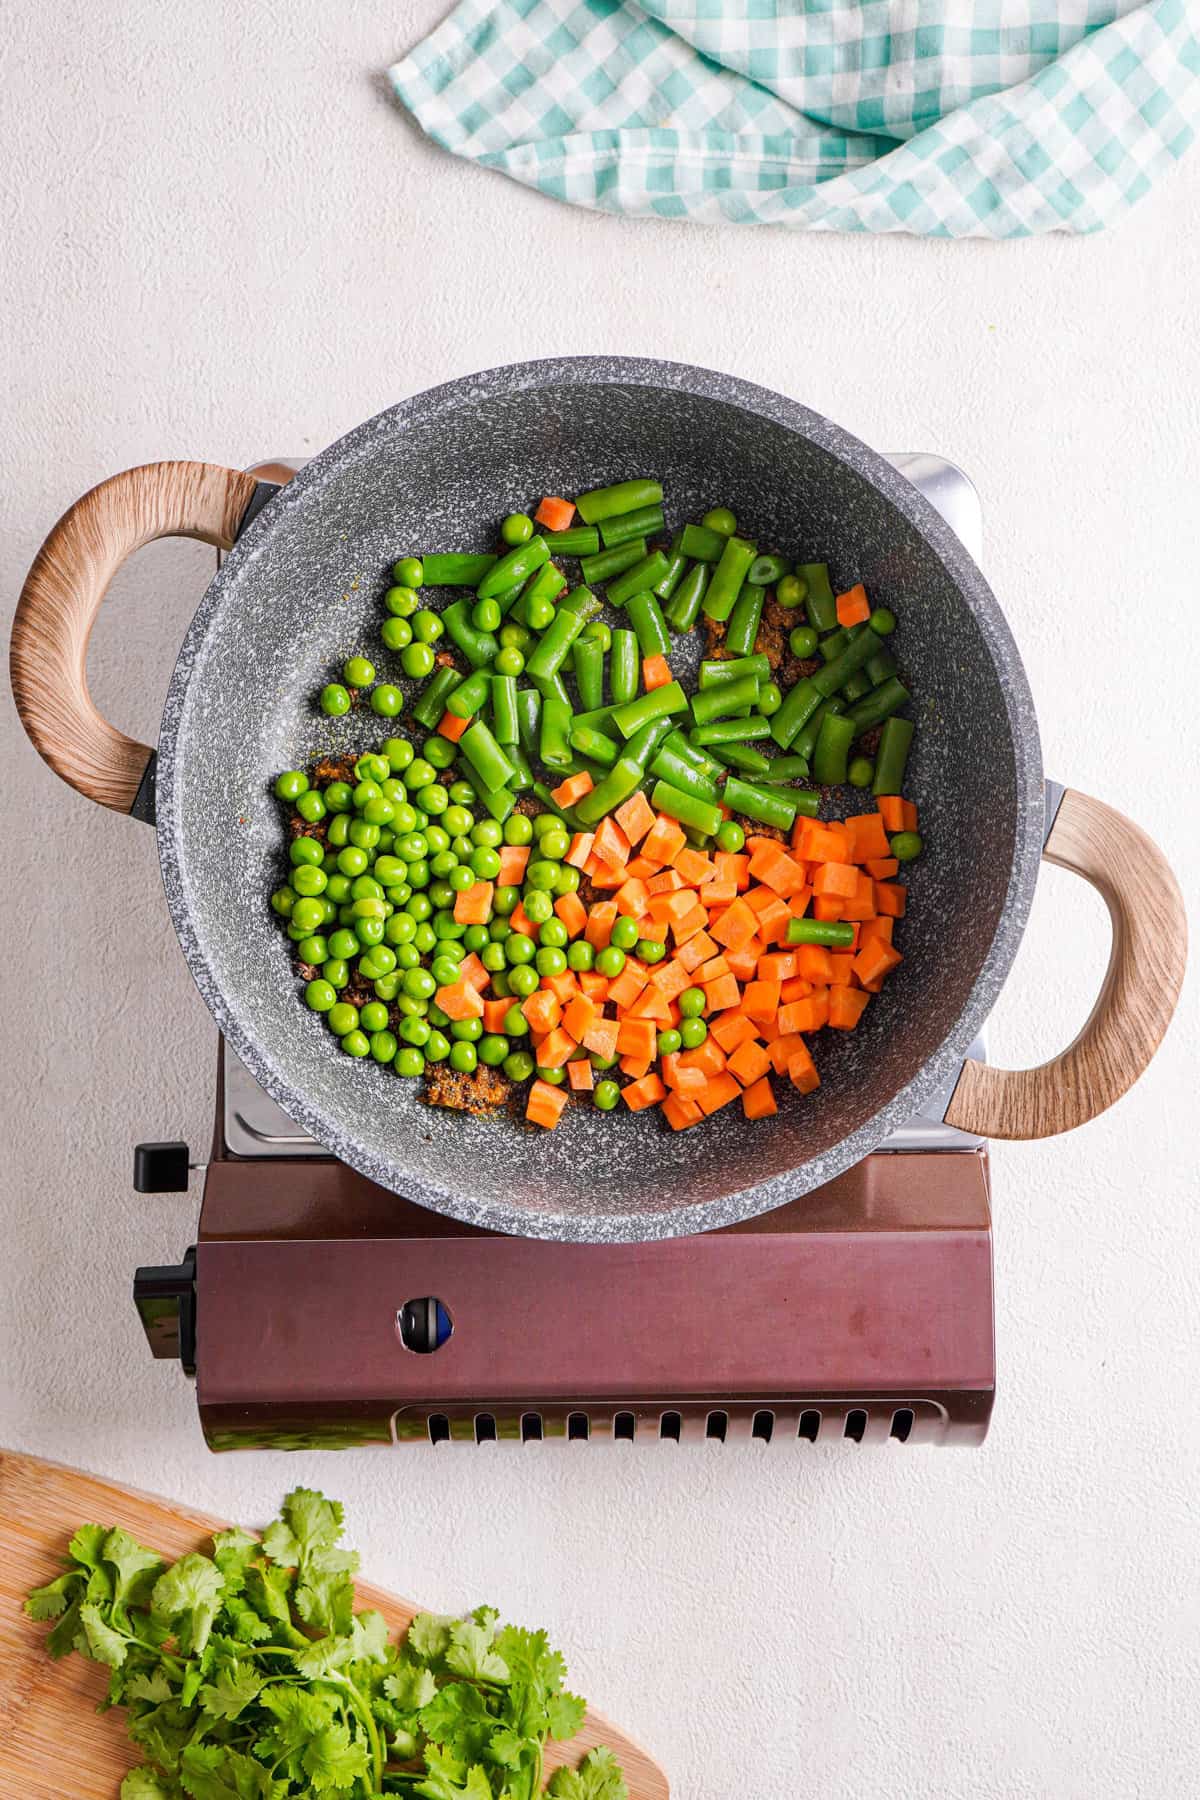 Overhead view of vegetables added to the skillet with spices.